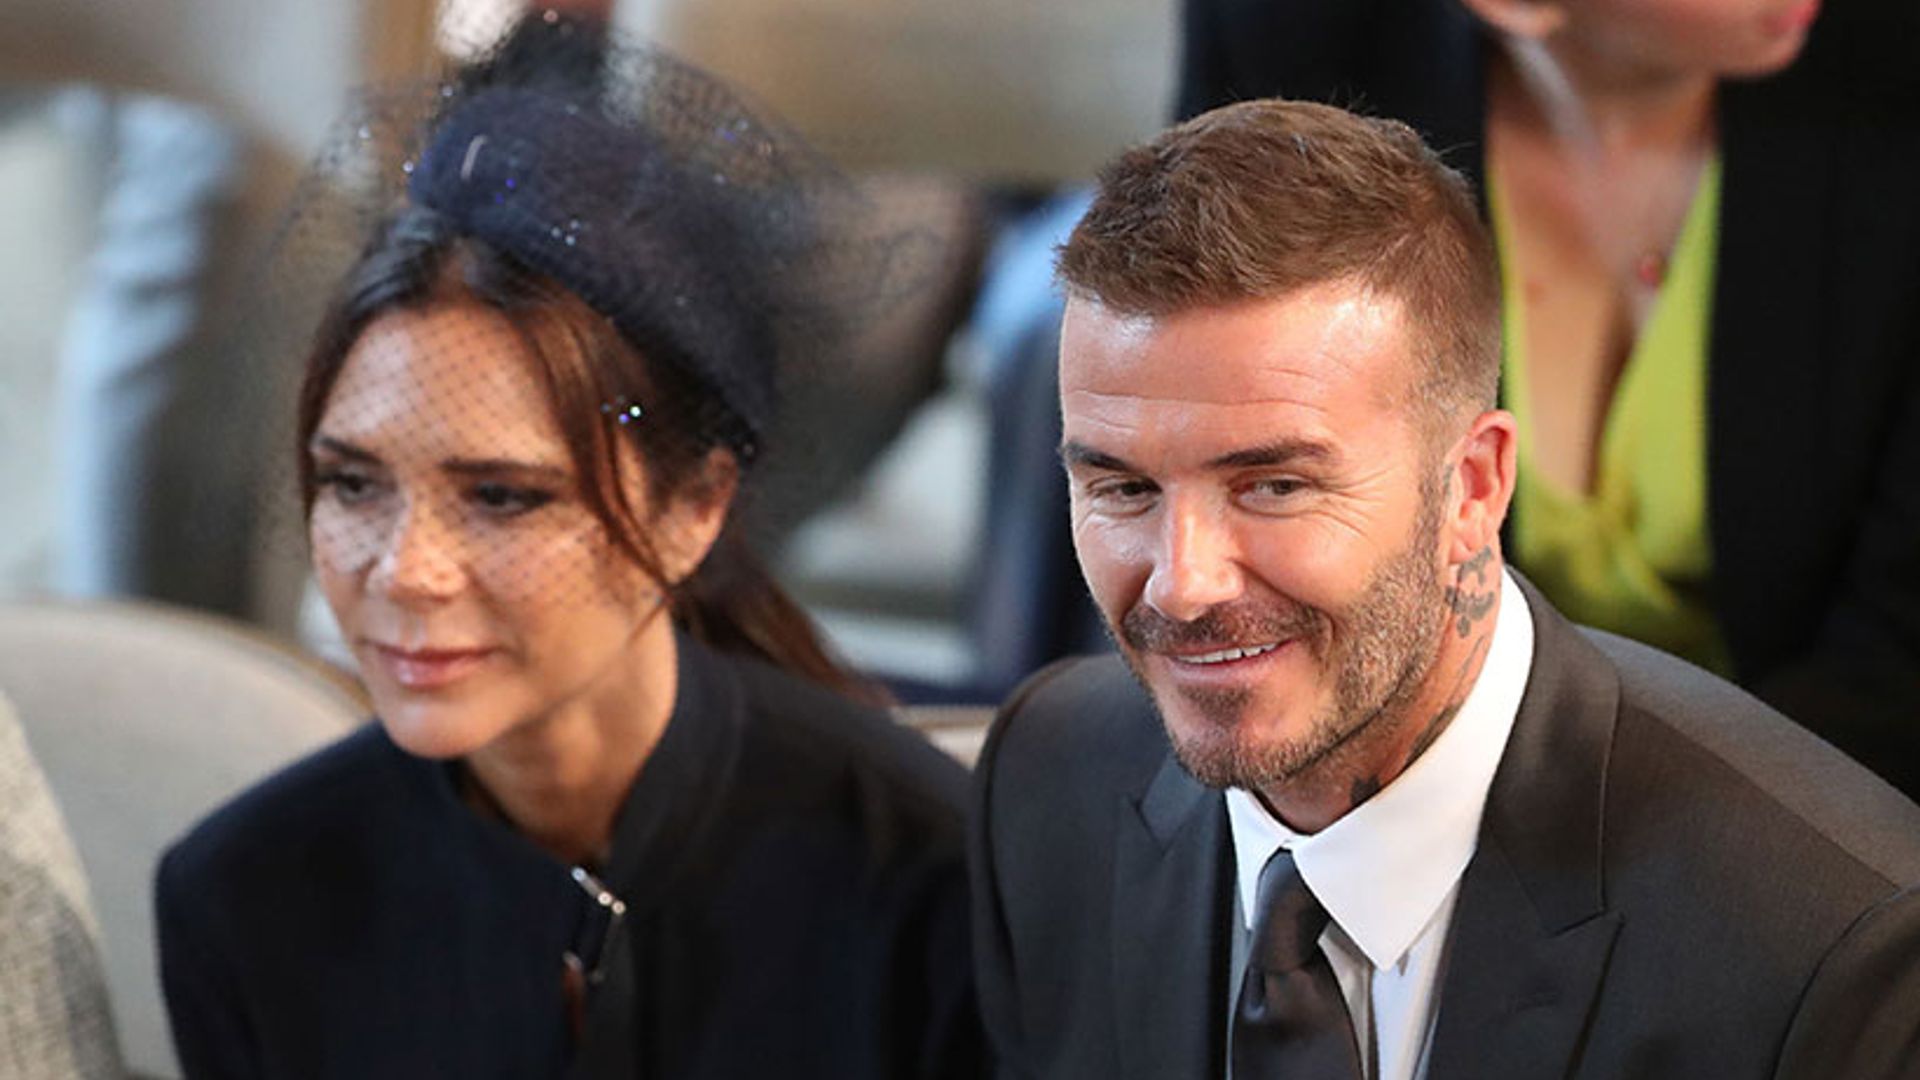 ALL the times Victoria Beckham smiled at the royal wedding